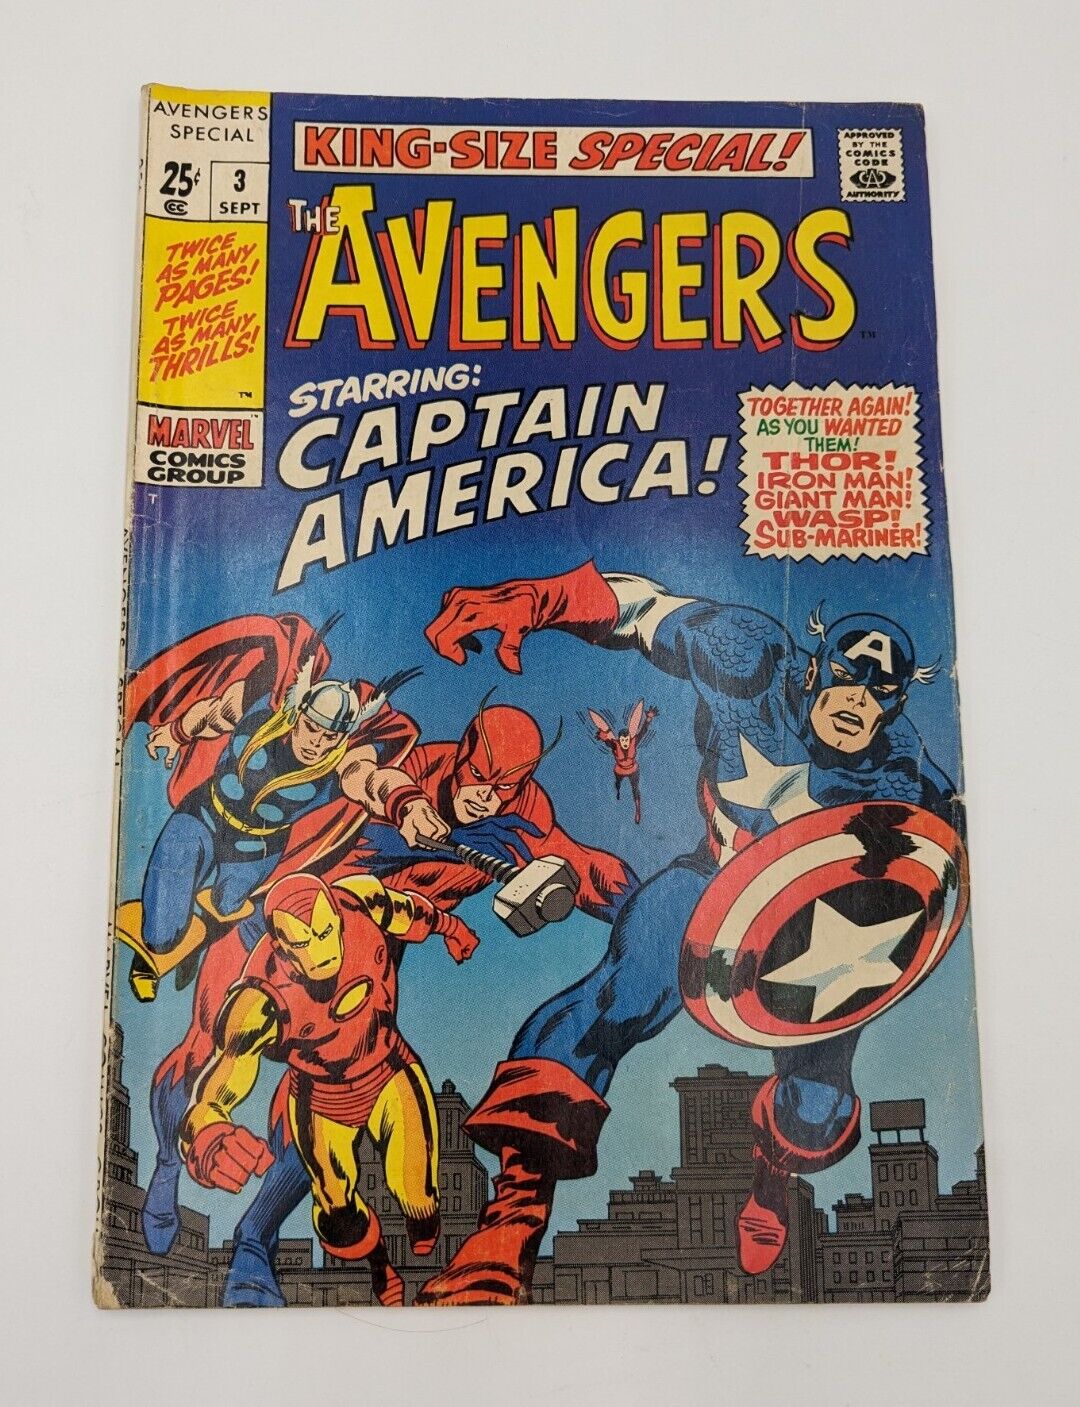 Avengers King-Size Special #3 (GD/VG) Lee, Kirby, Buscema Marvel 1969